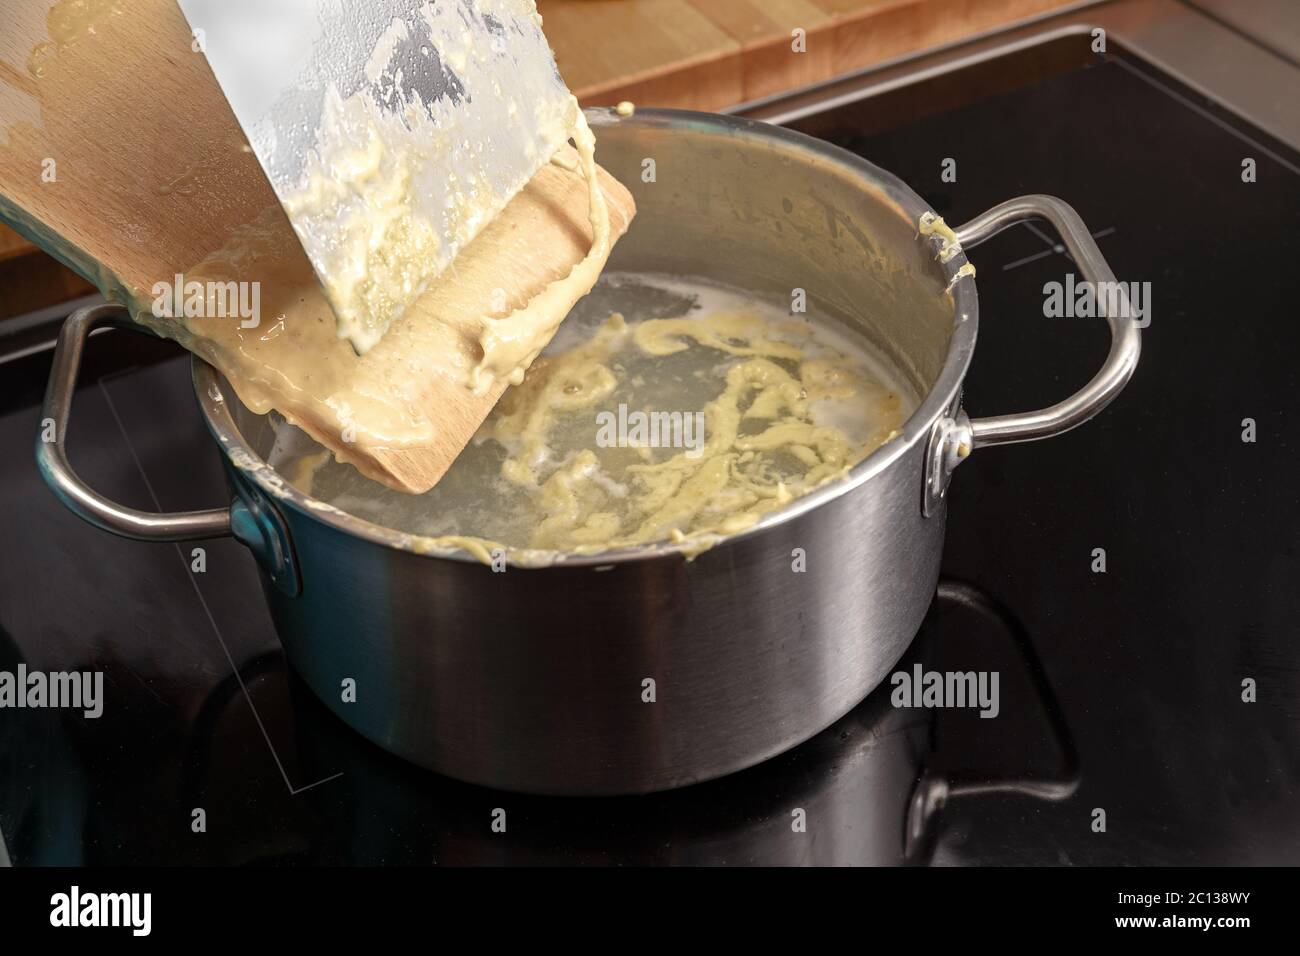 Cooking homemade spaetzle, egg pasta dough is scrapped from a wooden board into a pot with boiling water, typical dish in Schwaben, southern Germany a Stock Photo